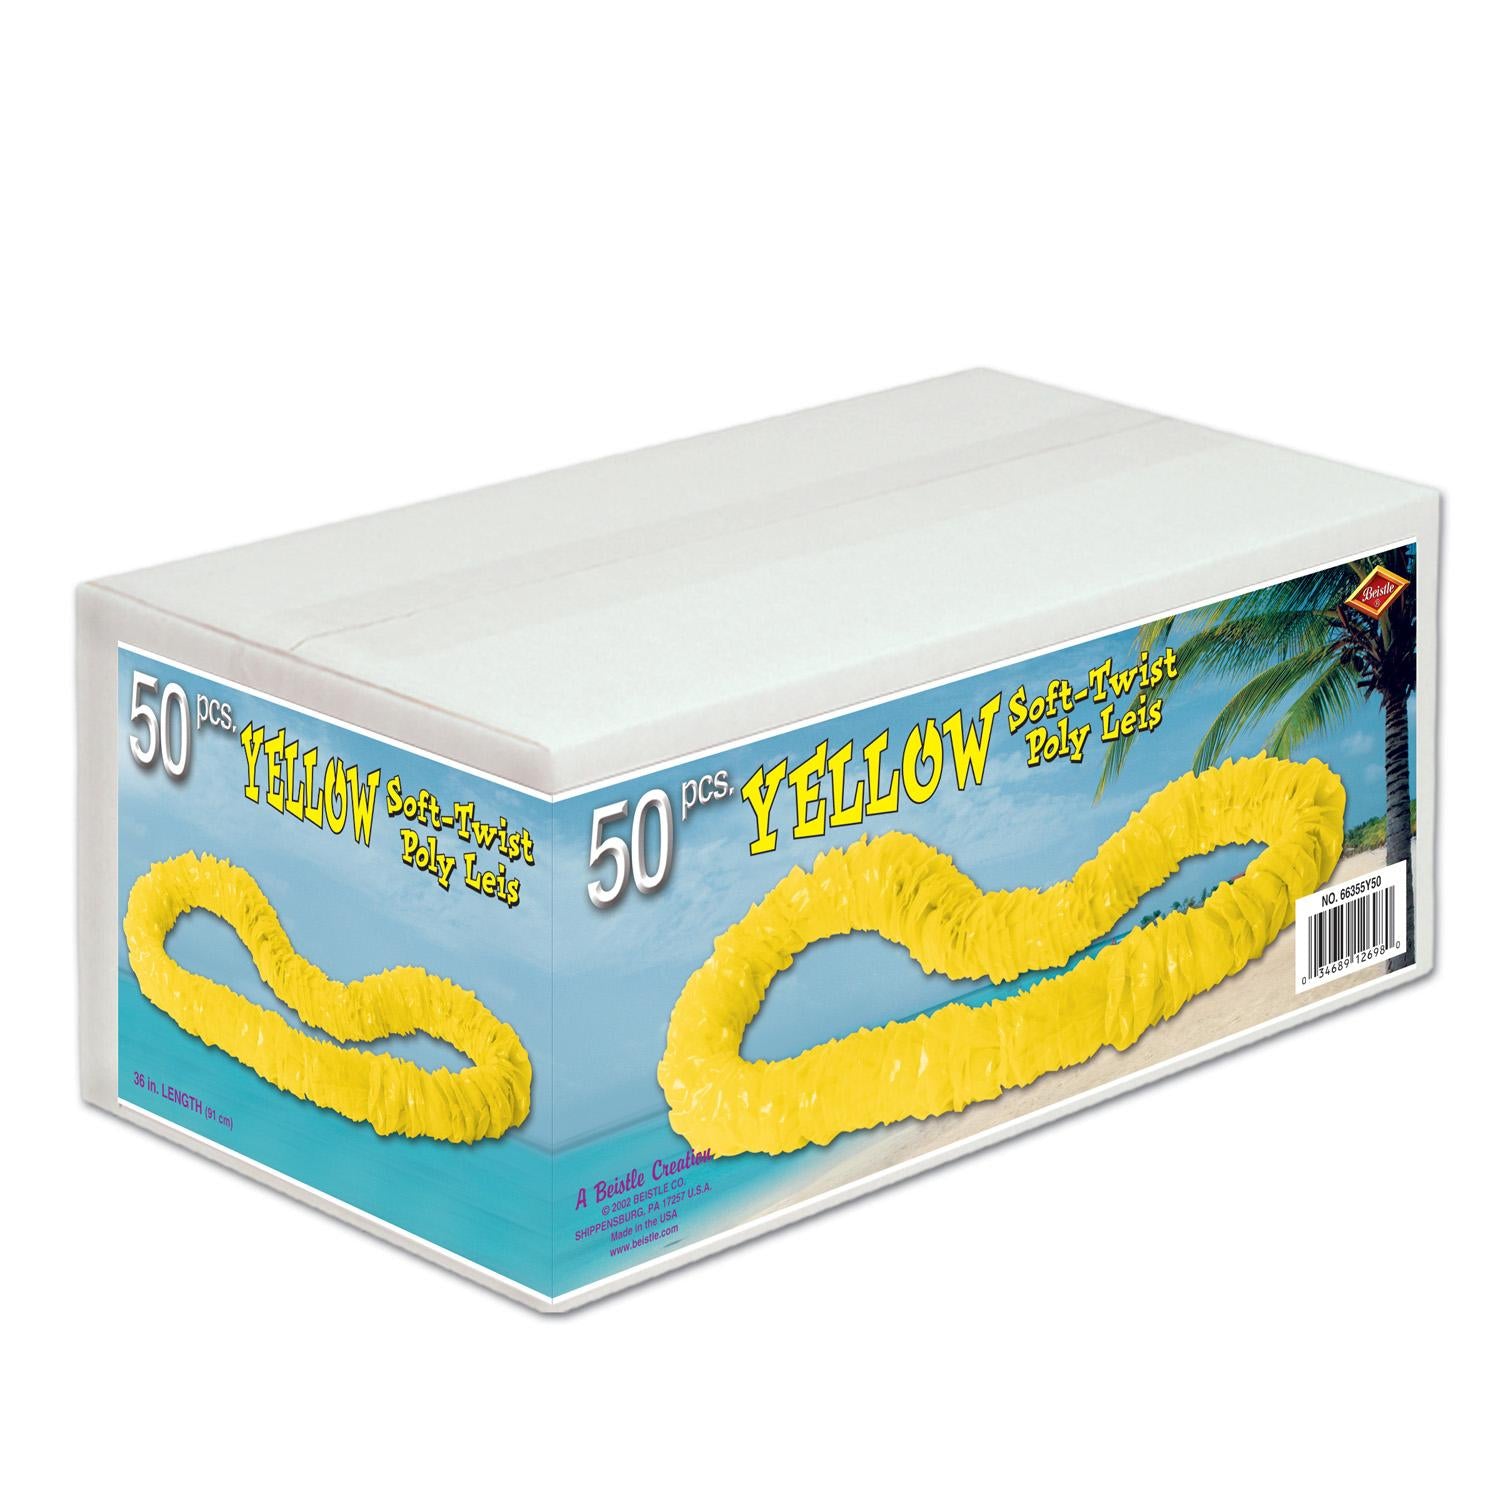 Luau Party Yellow Soft-Twist Poly Leis with Labeled Box (One Box of 50)